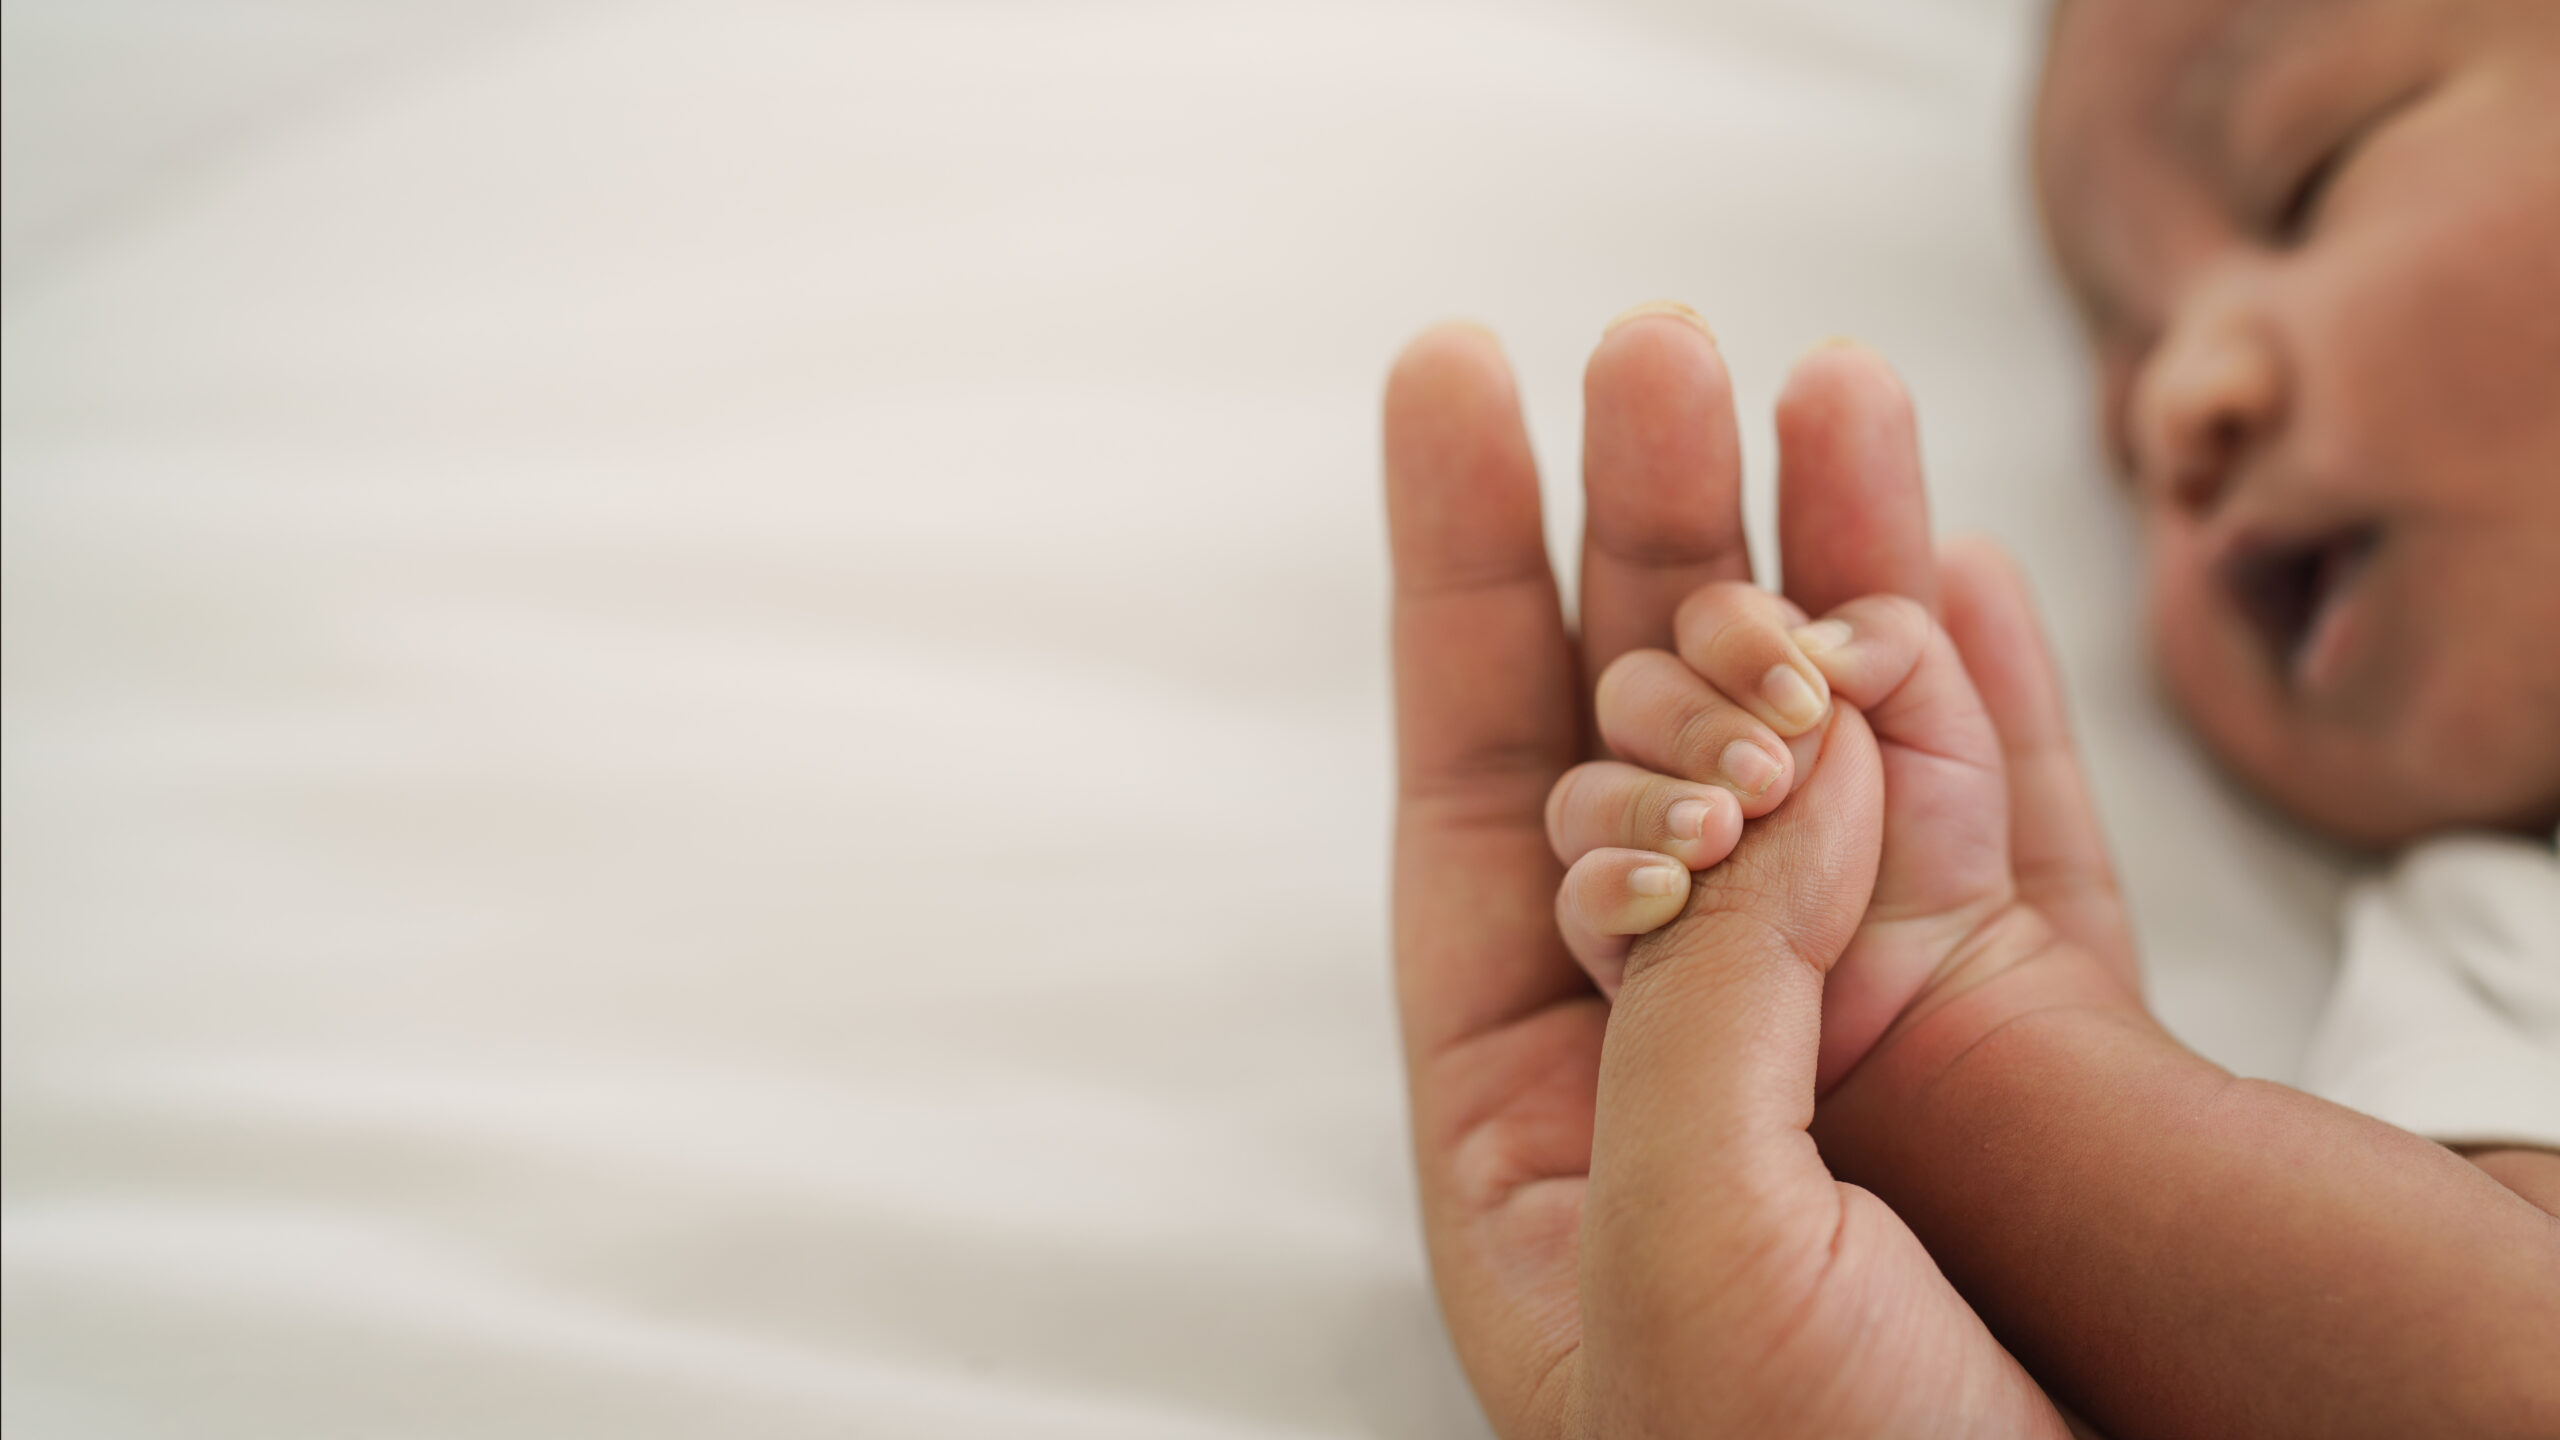 Image of infant lying down holding adult’s hand.